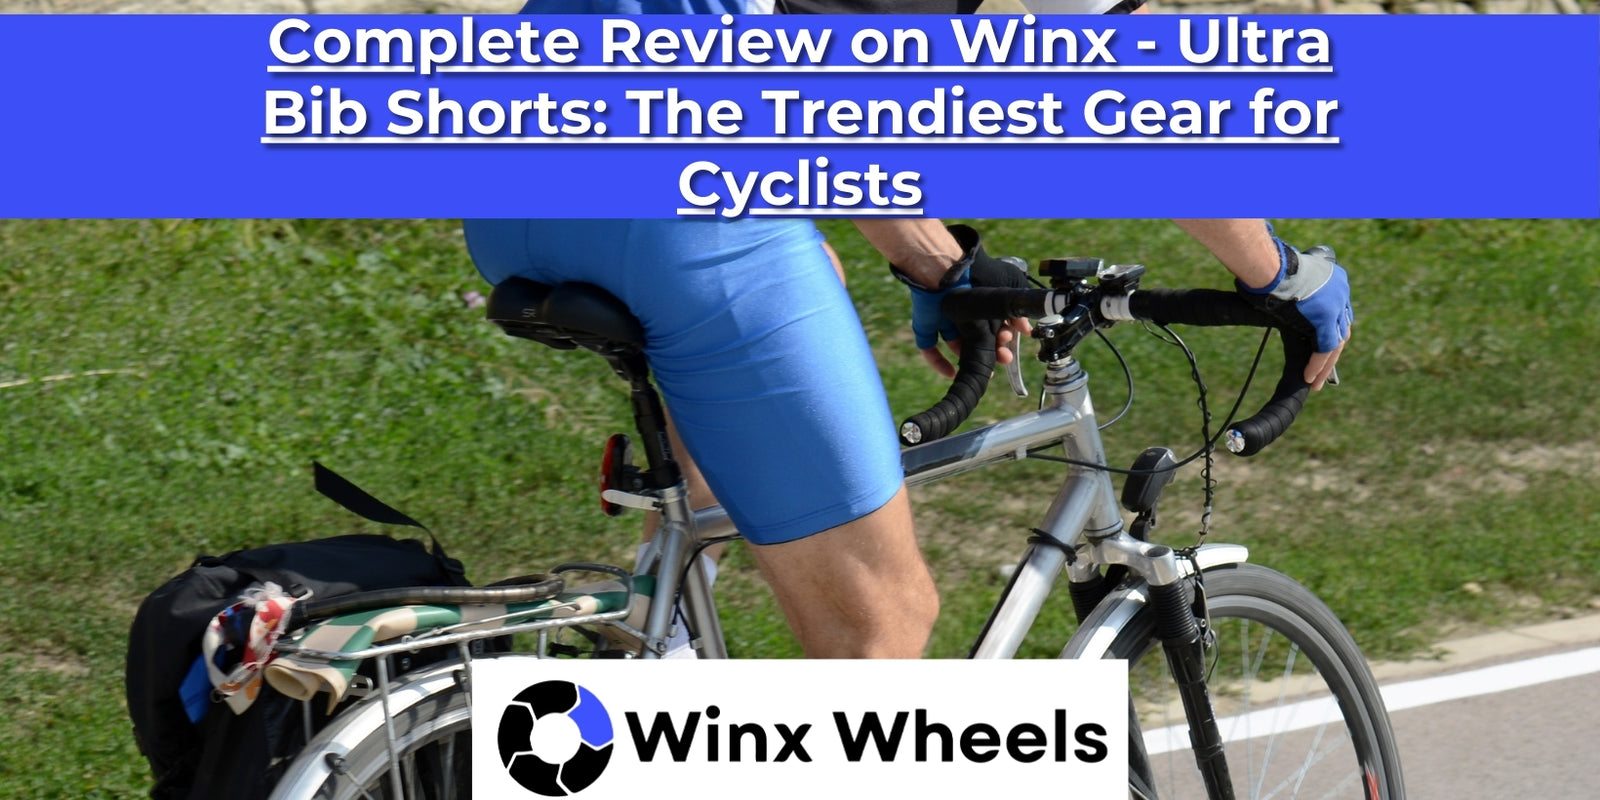 Complete Review on Winx - Ultra Bib Shorts The Trendiest Gear for Cyclists